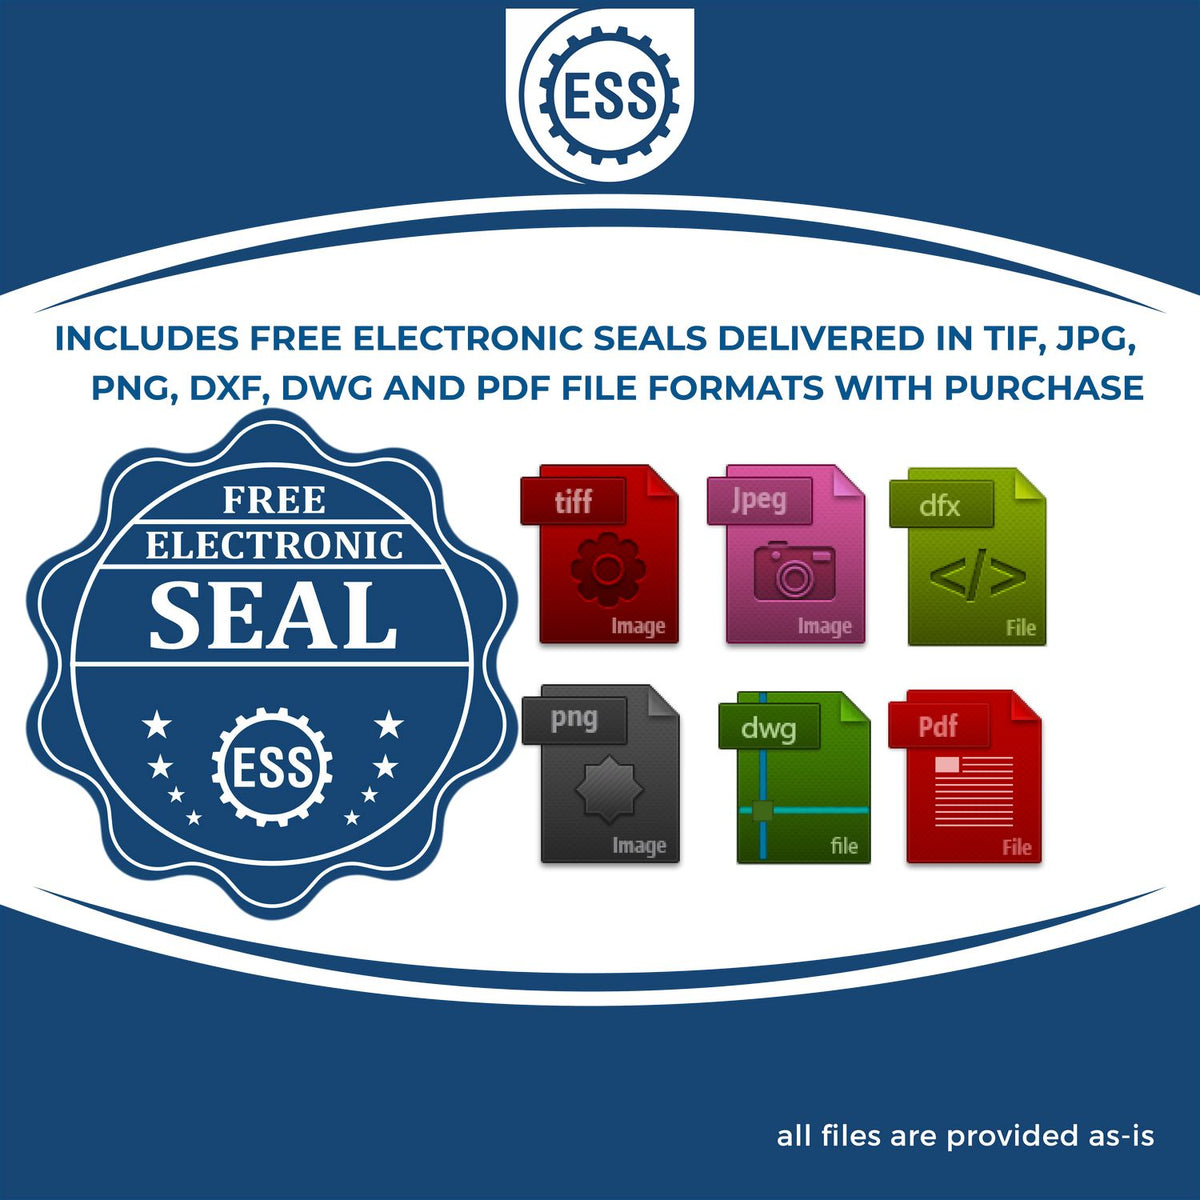 An infographic for the free electronic seal for the California Professional Engineer Seal Stamp illustrating the different file type icons such as DXF, DWG, TIF, JPG and PNG.